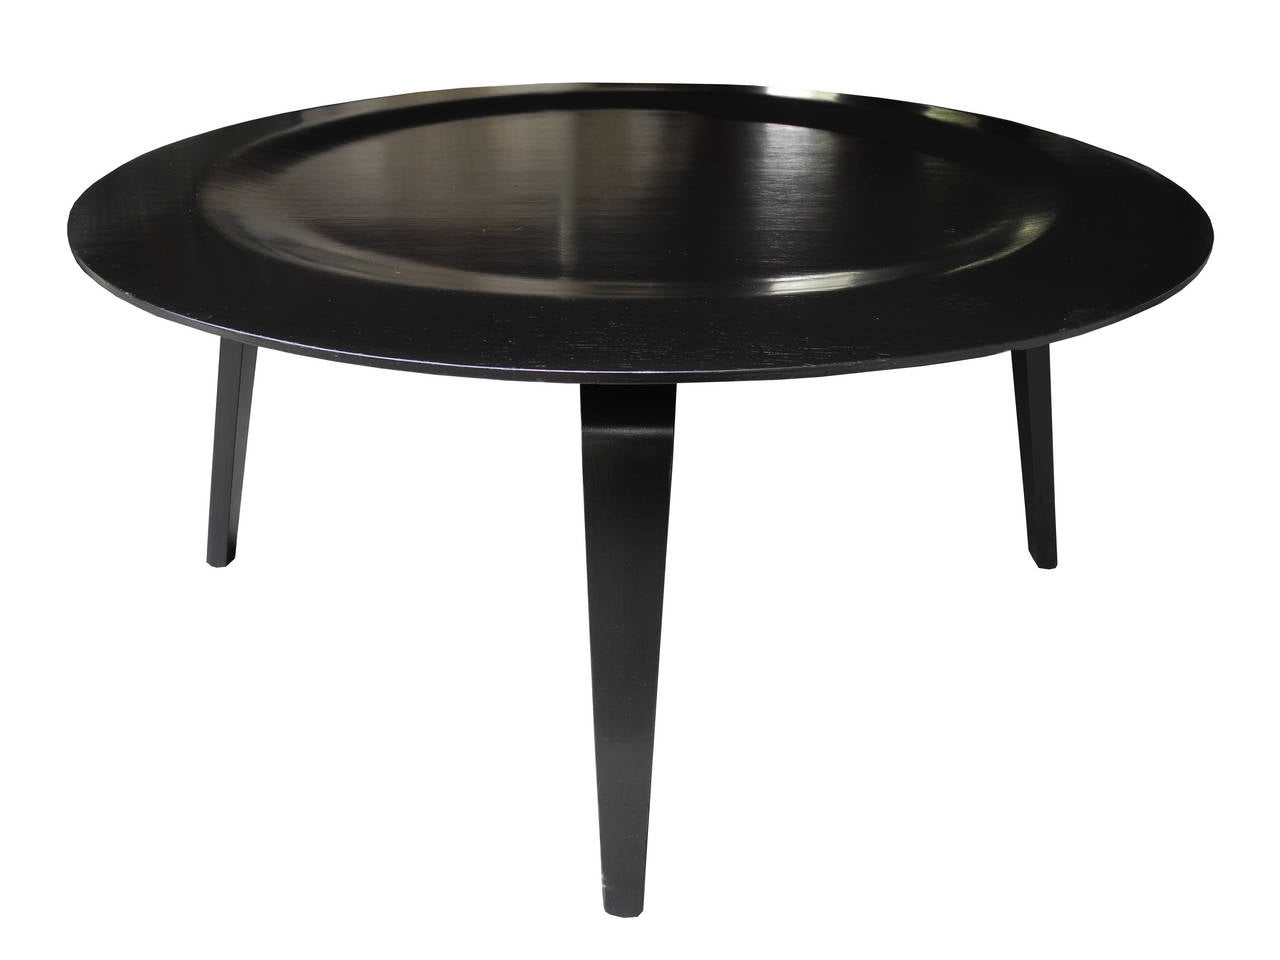 American Modern Black Molded Plywood Round Coffee Table by Eames for Herman Miller